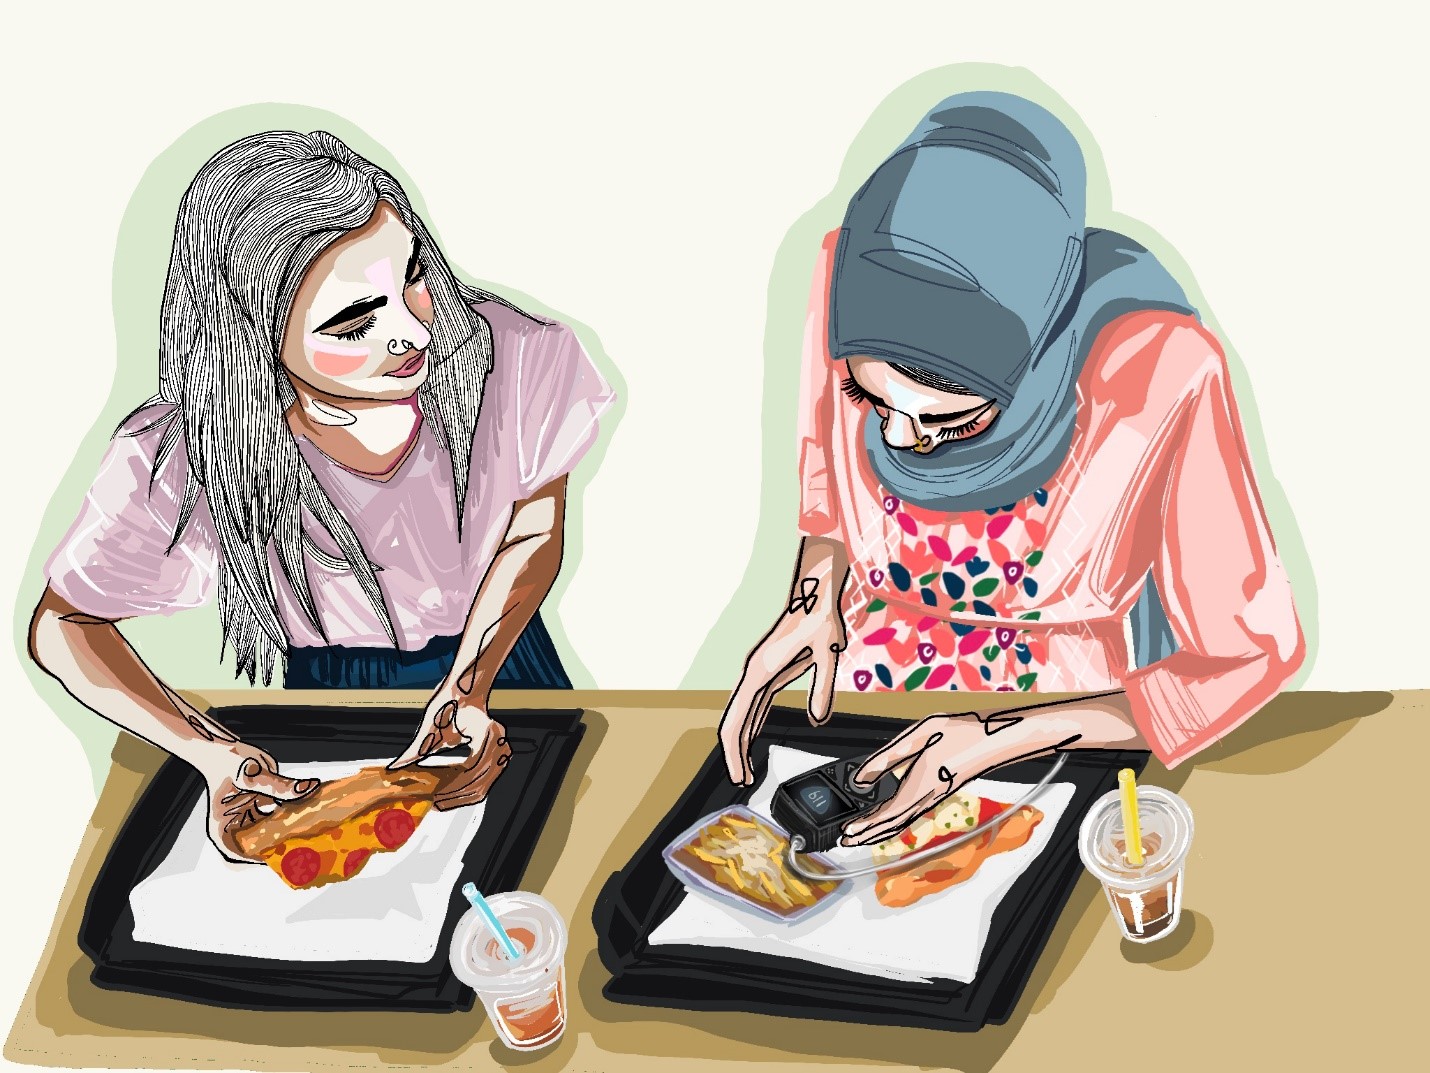 A diabetic Pakistani woman sits in a pizza restaurant with a childhood friend, using a pump to inject some insulin before eating. The friend carries on the conversation while holding a slice of pizza, and is a Pakistani woman with wavy hair, a pink shirt, and high-rise jeans. The woman on the right wears a blue hijab paired with a floral pink dress. Their table is filled with pizza, fries, and fresh-squeezed fruit drinks.